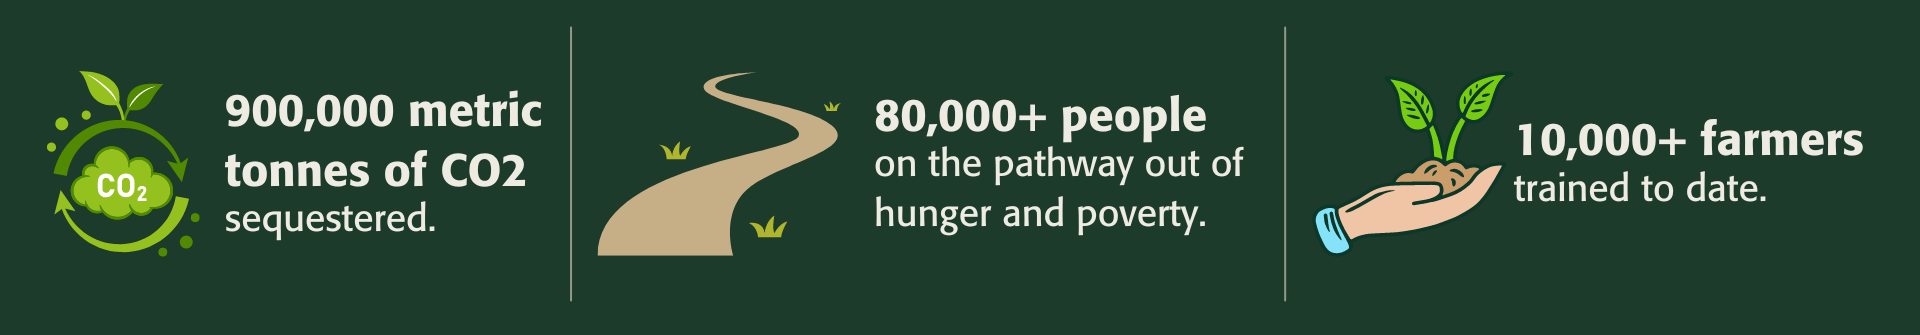 Infographic: 900,000 metric tonnes of CO2 sequestered, 80,000+ people on the pathway out of hunger and poverty, 10,000+ farmers trained to date.